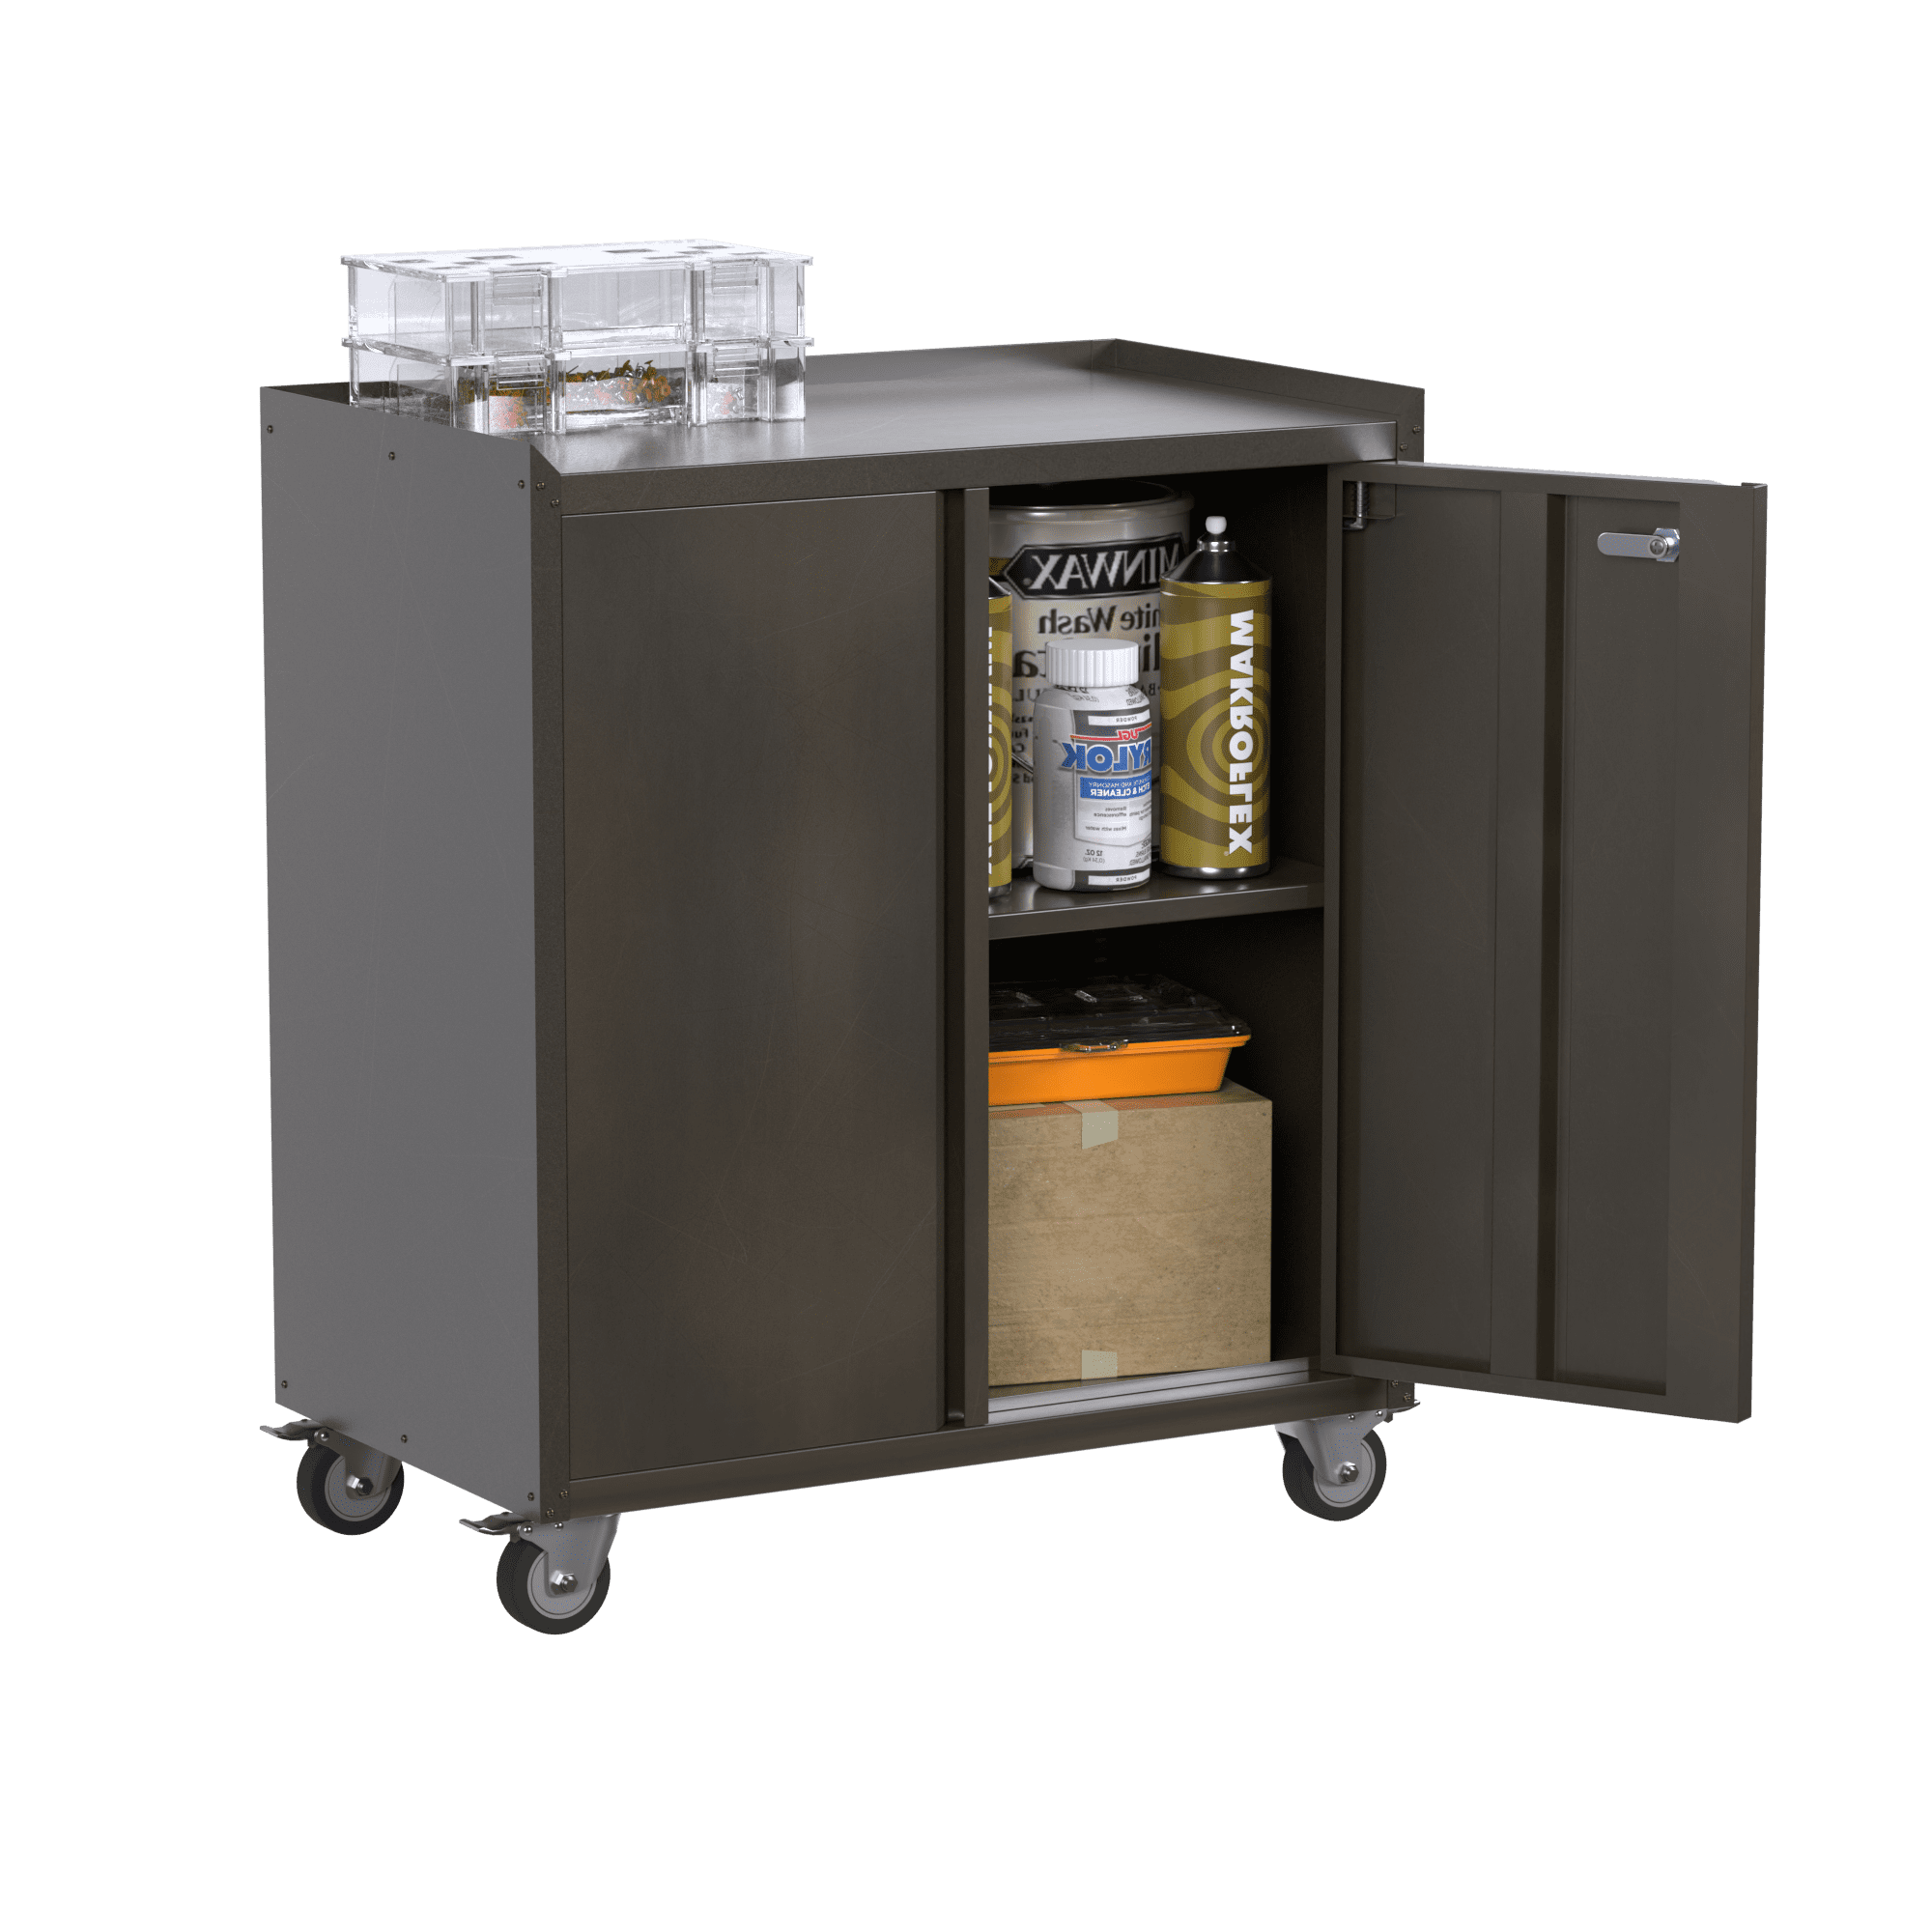 BENTISM Metal Rolling Garage Cabinet 74'' Tall Industrial Storage Cabinet  with Wheels, Locking Doors and 4 Adjustable Shelves Large Steel Utility  Tool